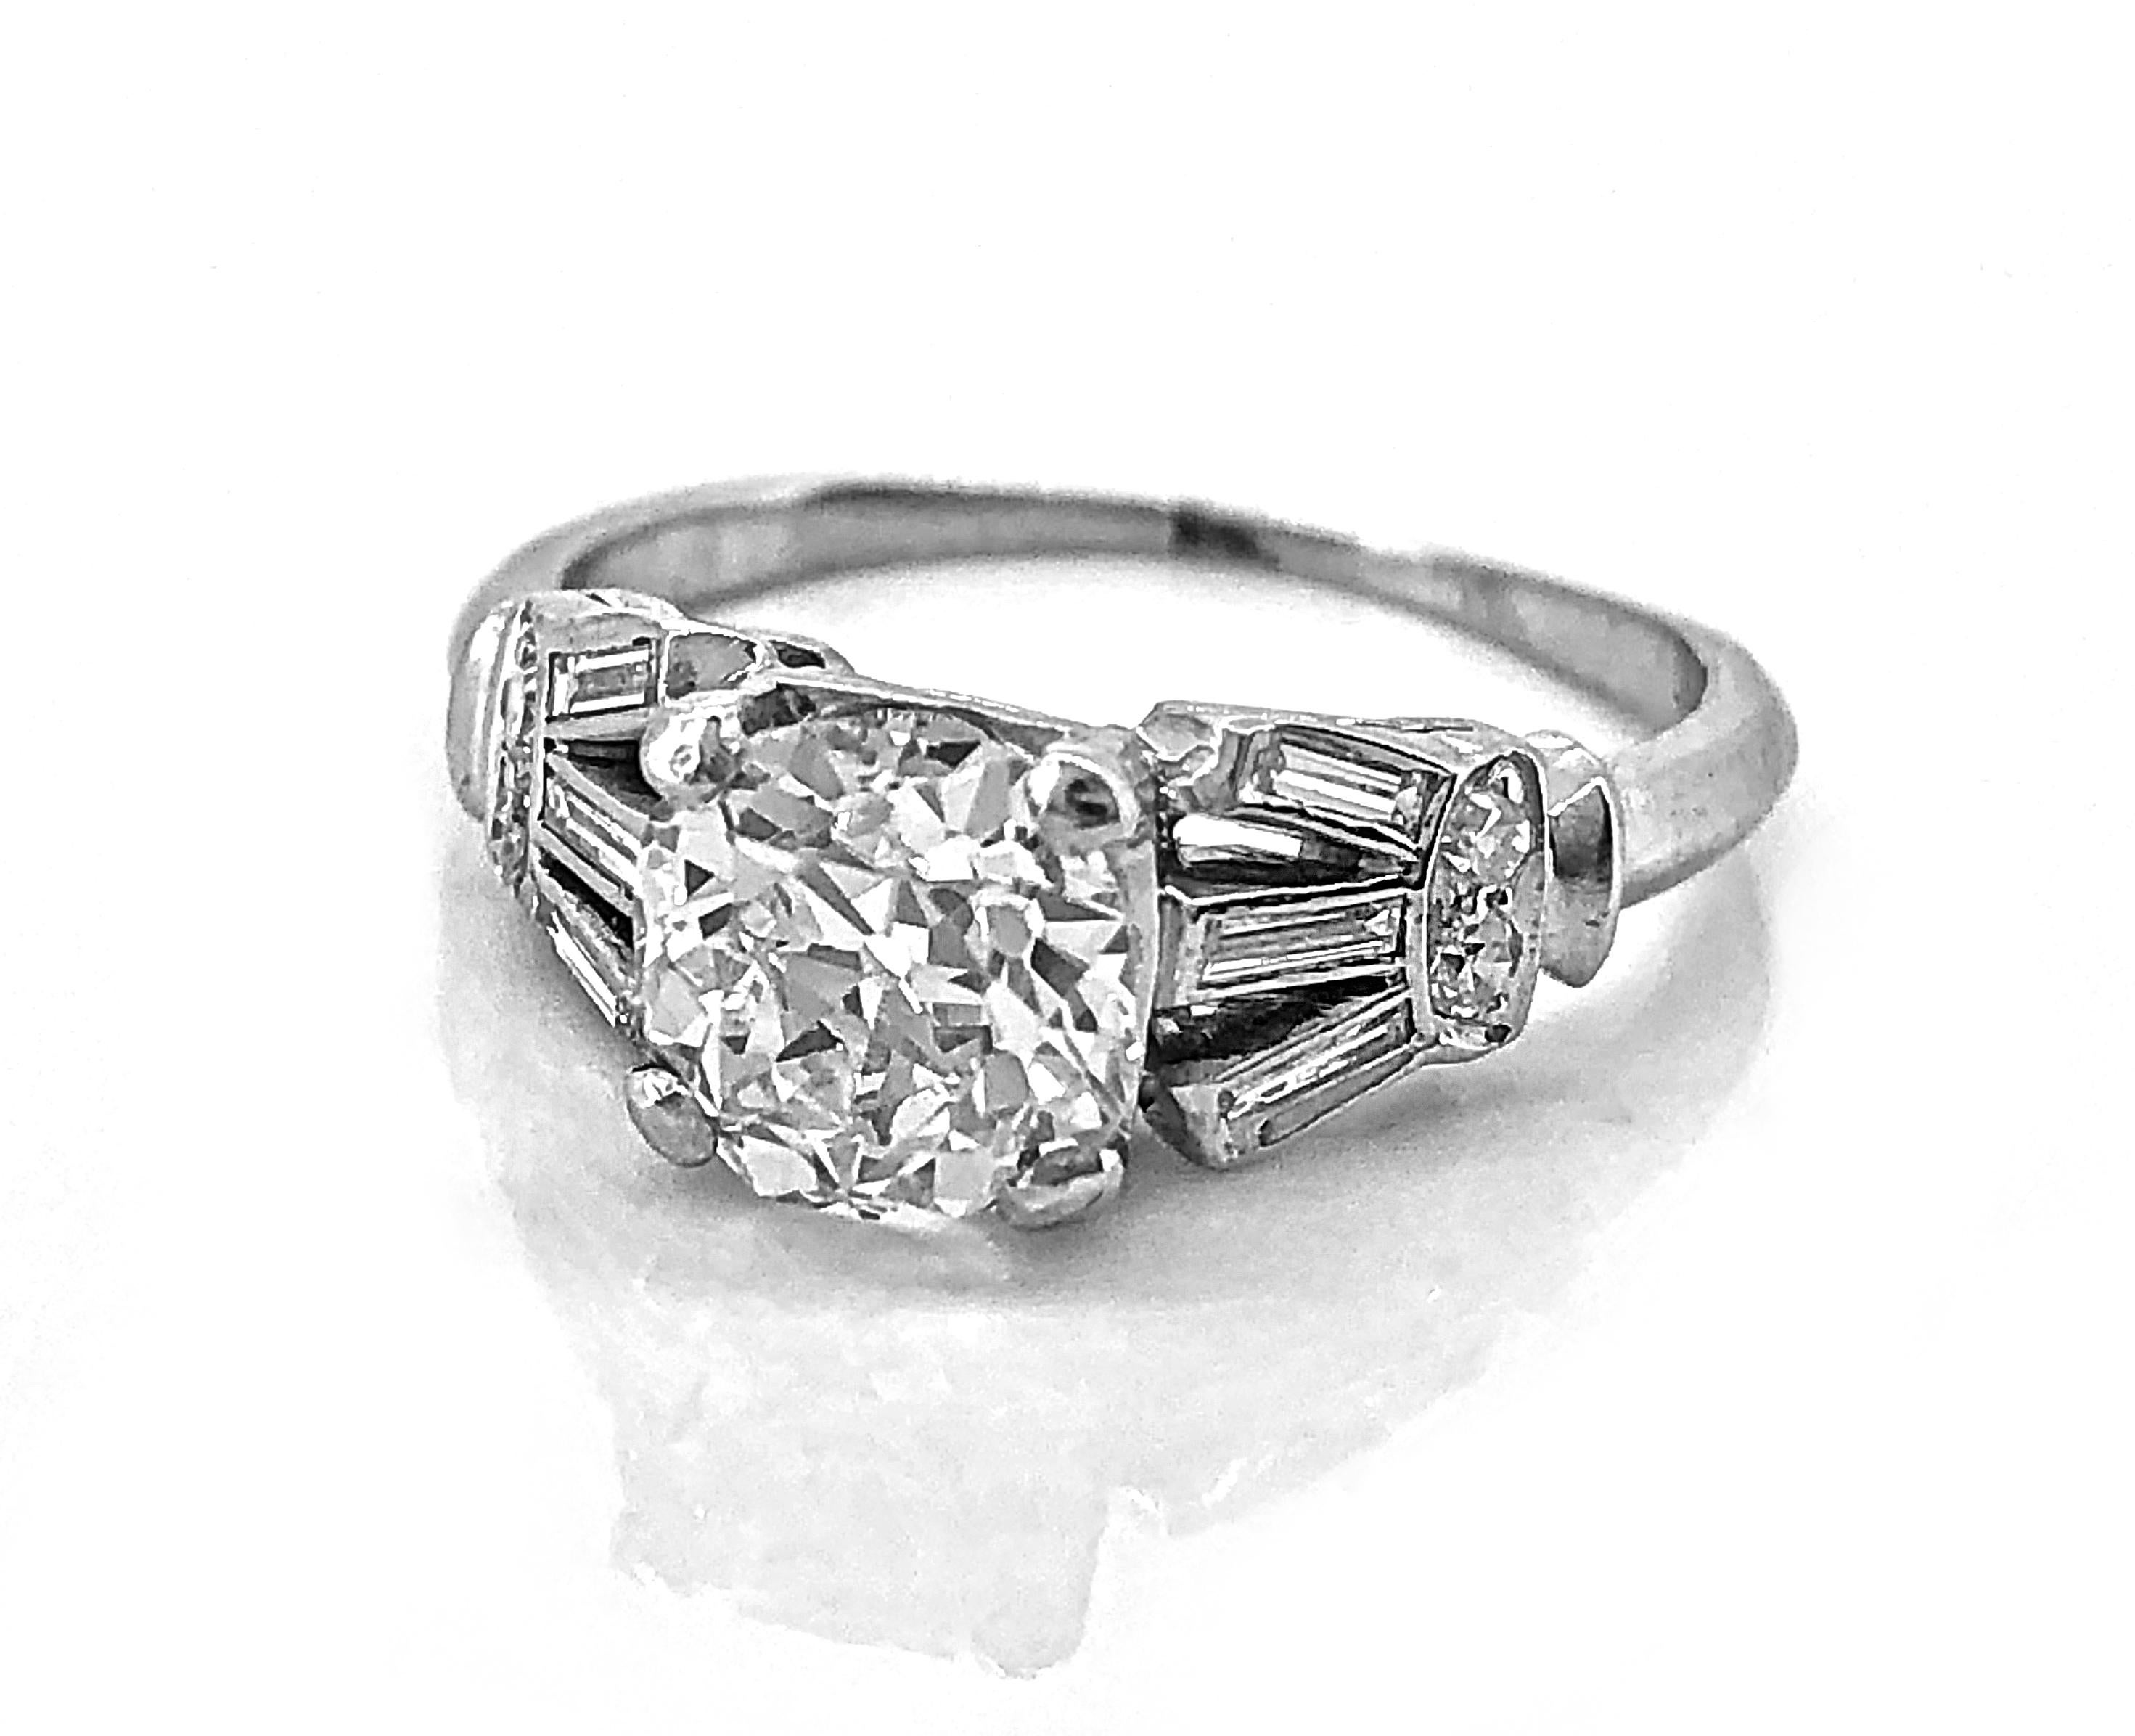 An outstanding 1.05ct. apx. european cut diamond Art Deco Antique engagement ring, crafted in platinum. The center stone features fantastic VS1 clarity and K color, and possesses fire and brilliance. Absolutely sensational!

Primary Stone(s):